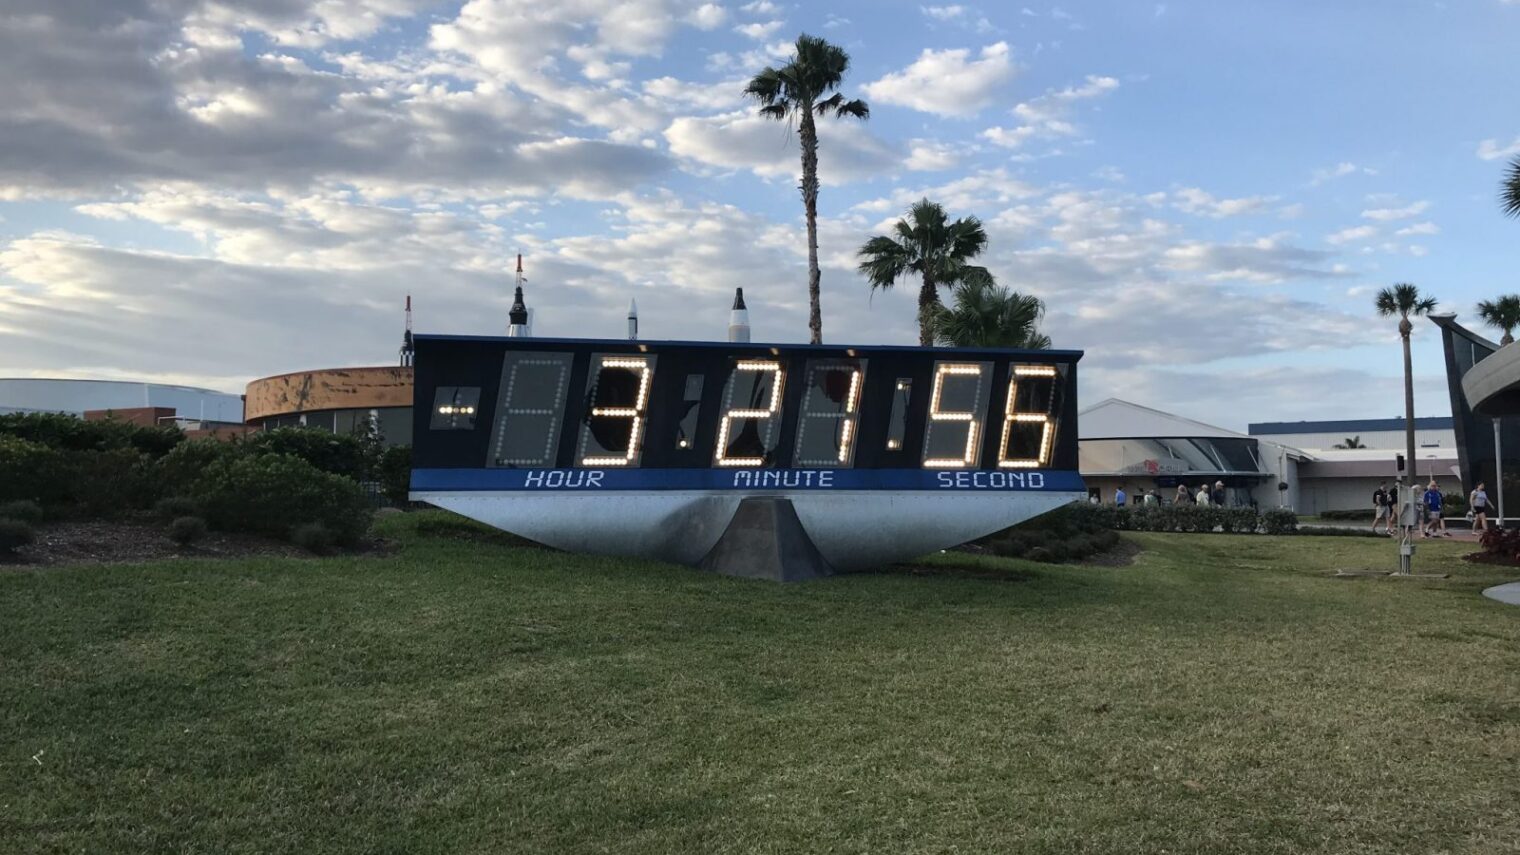 The countdown board at Kennedy Space Center ticked off the hours until SpaceIL’s Beresheet spacecraft took off for the Moon. Photo by Erica Kaplan